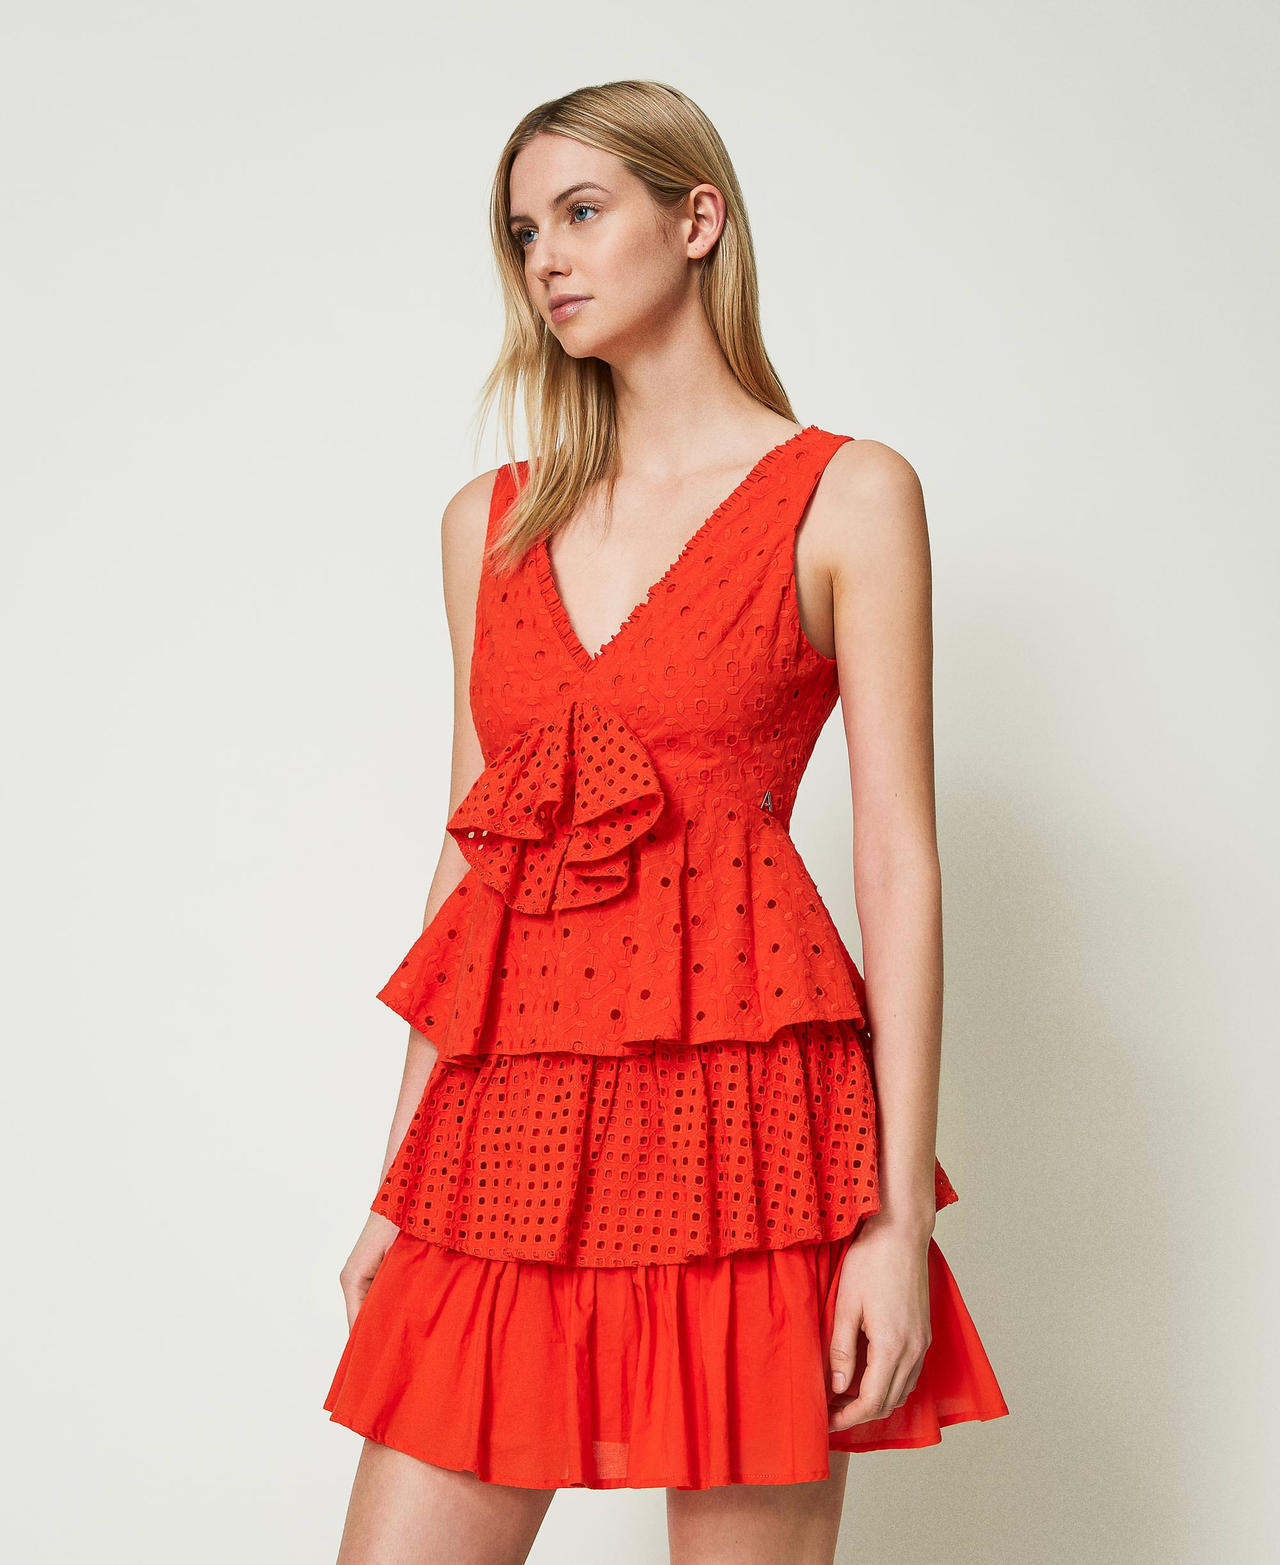 Robe courte en broderie anglaise avec volants Rouge « Scarlet Ibis » Femme 241AT2077-03